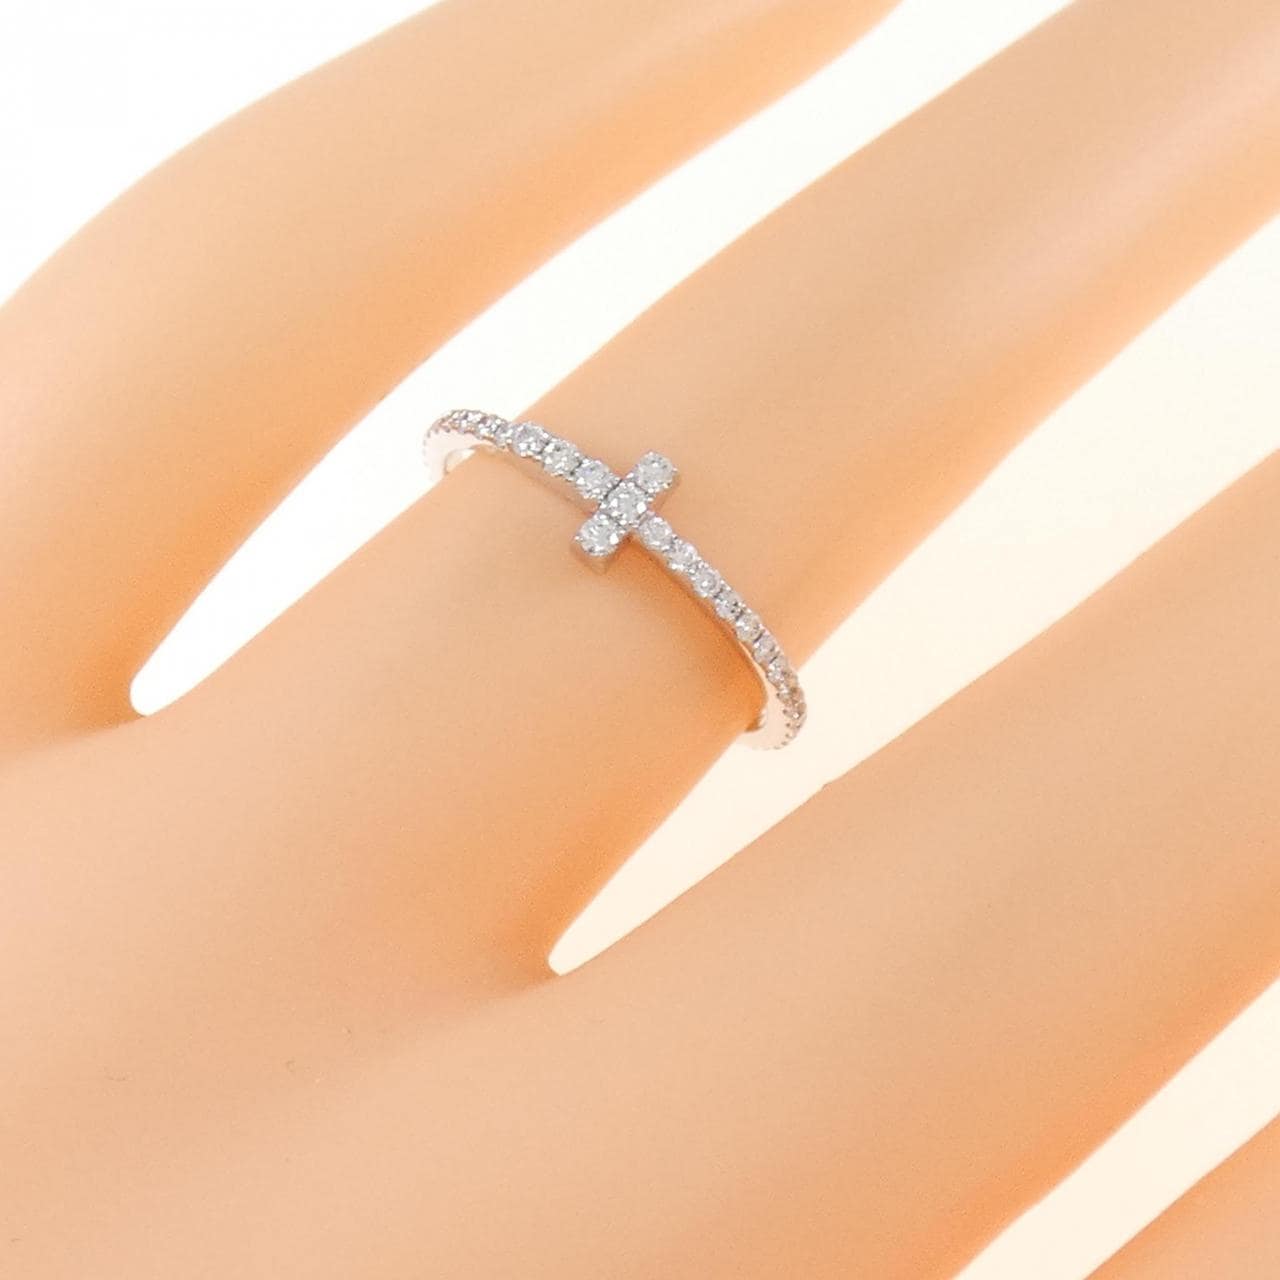 TIFFANY T wire ring